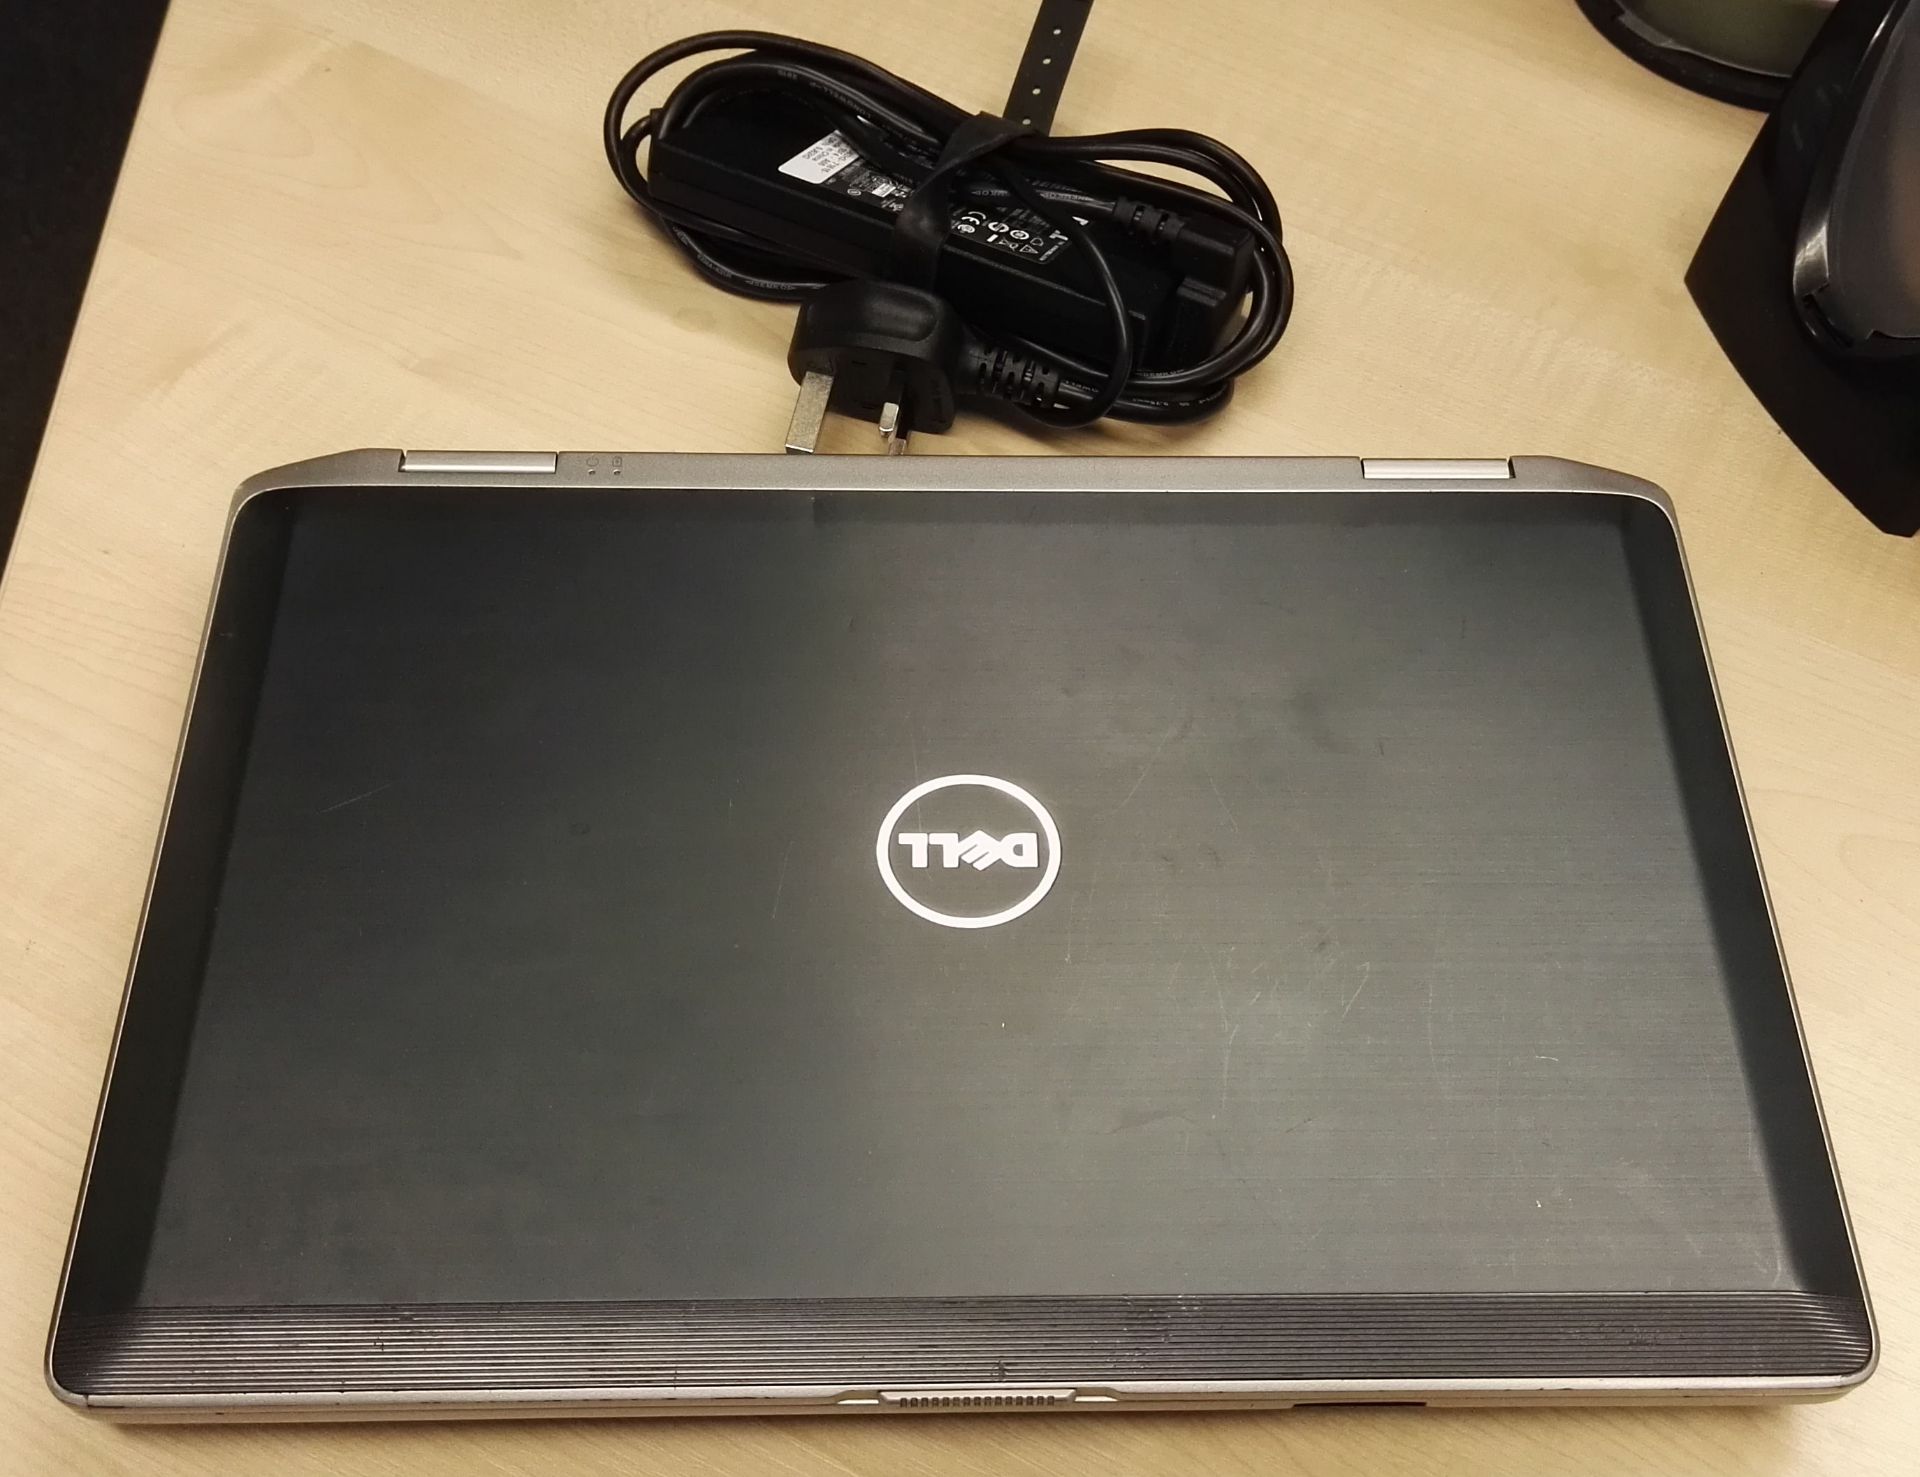 1 x Dell E6420 Latitude Laptop Computer - Features 6gb RAM, 320gb Hard Drive, Intel i5 2.5GHz - Image 2 of 19